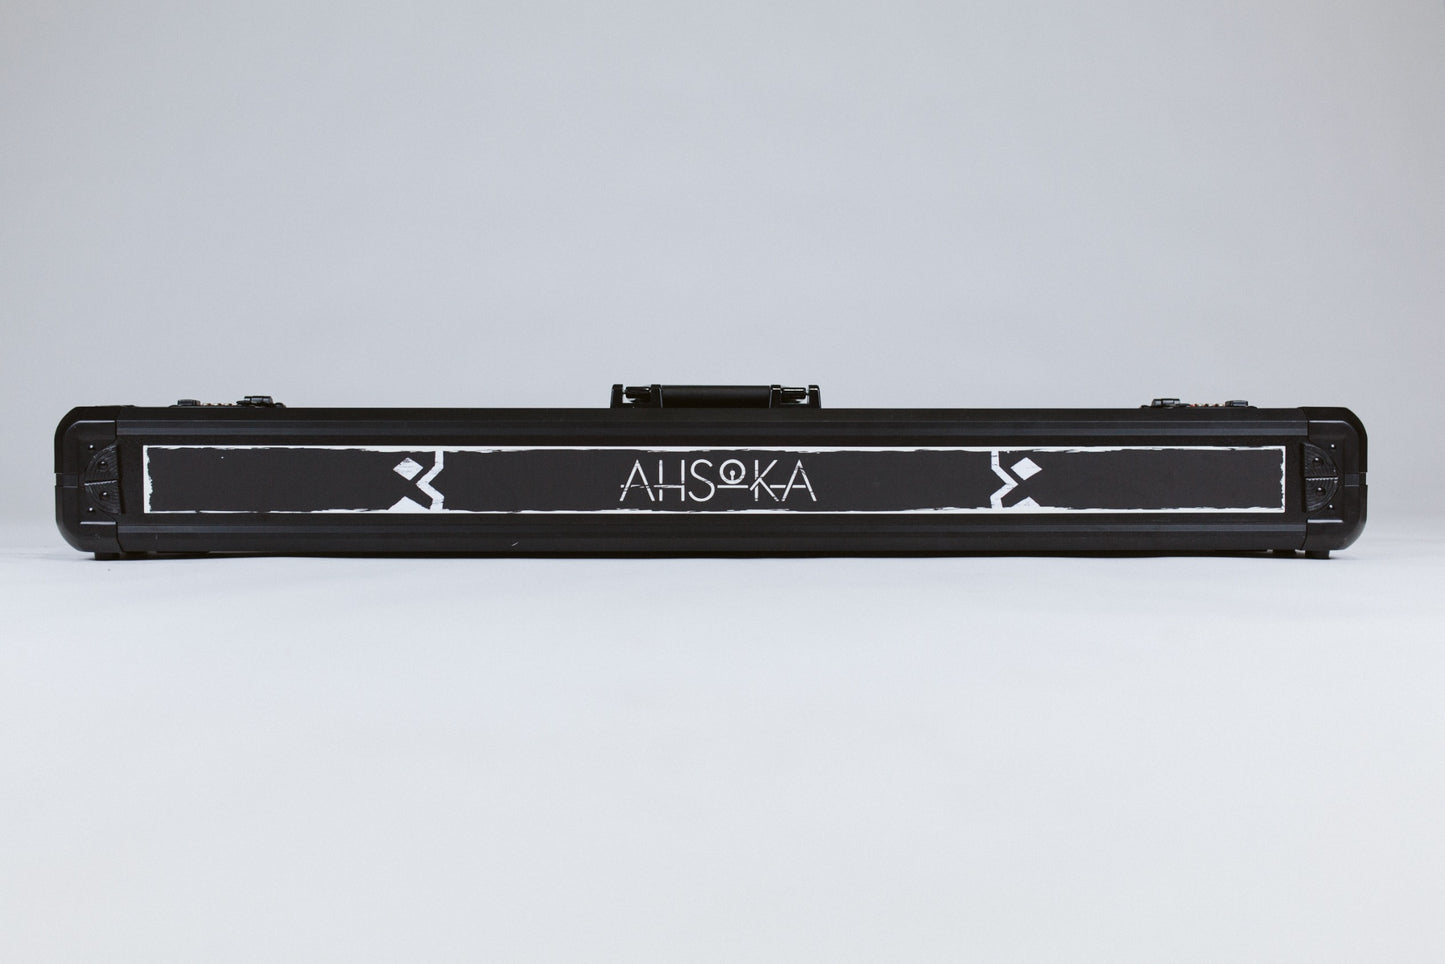 Hard Shell Saber Case with Number Lock